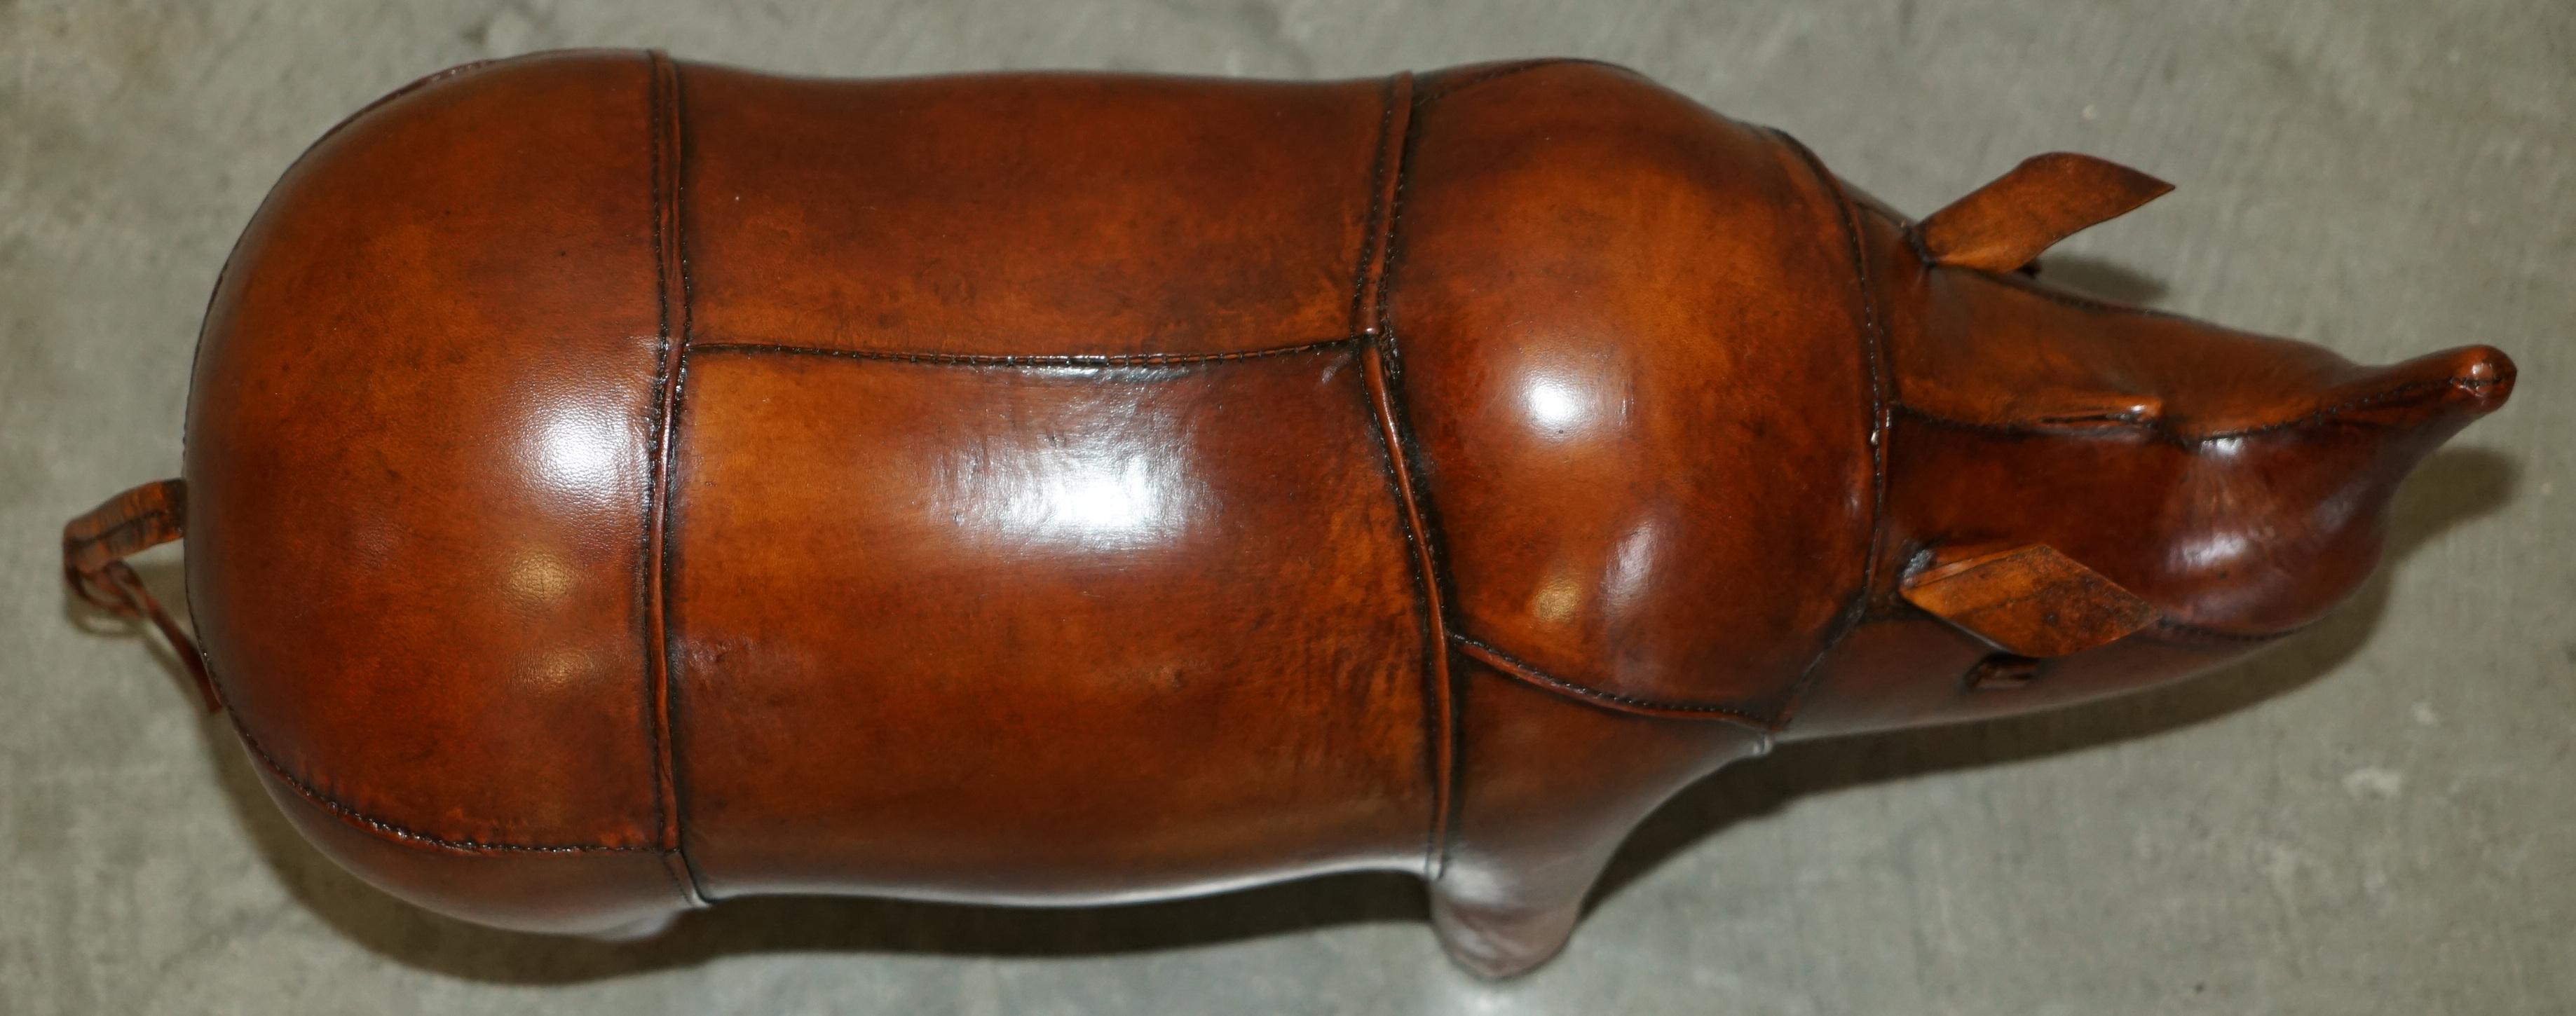 NEW OLD STOCK LiBERTY LONDON STYLE OMERSA BROWN LEATHER FOOTSTOOL RHINOCEROS For Sale 4